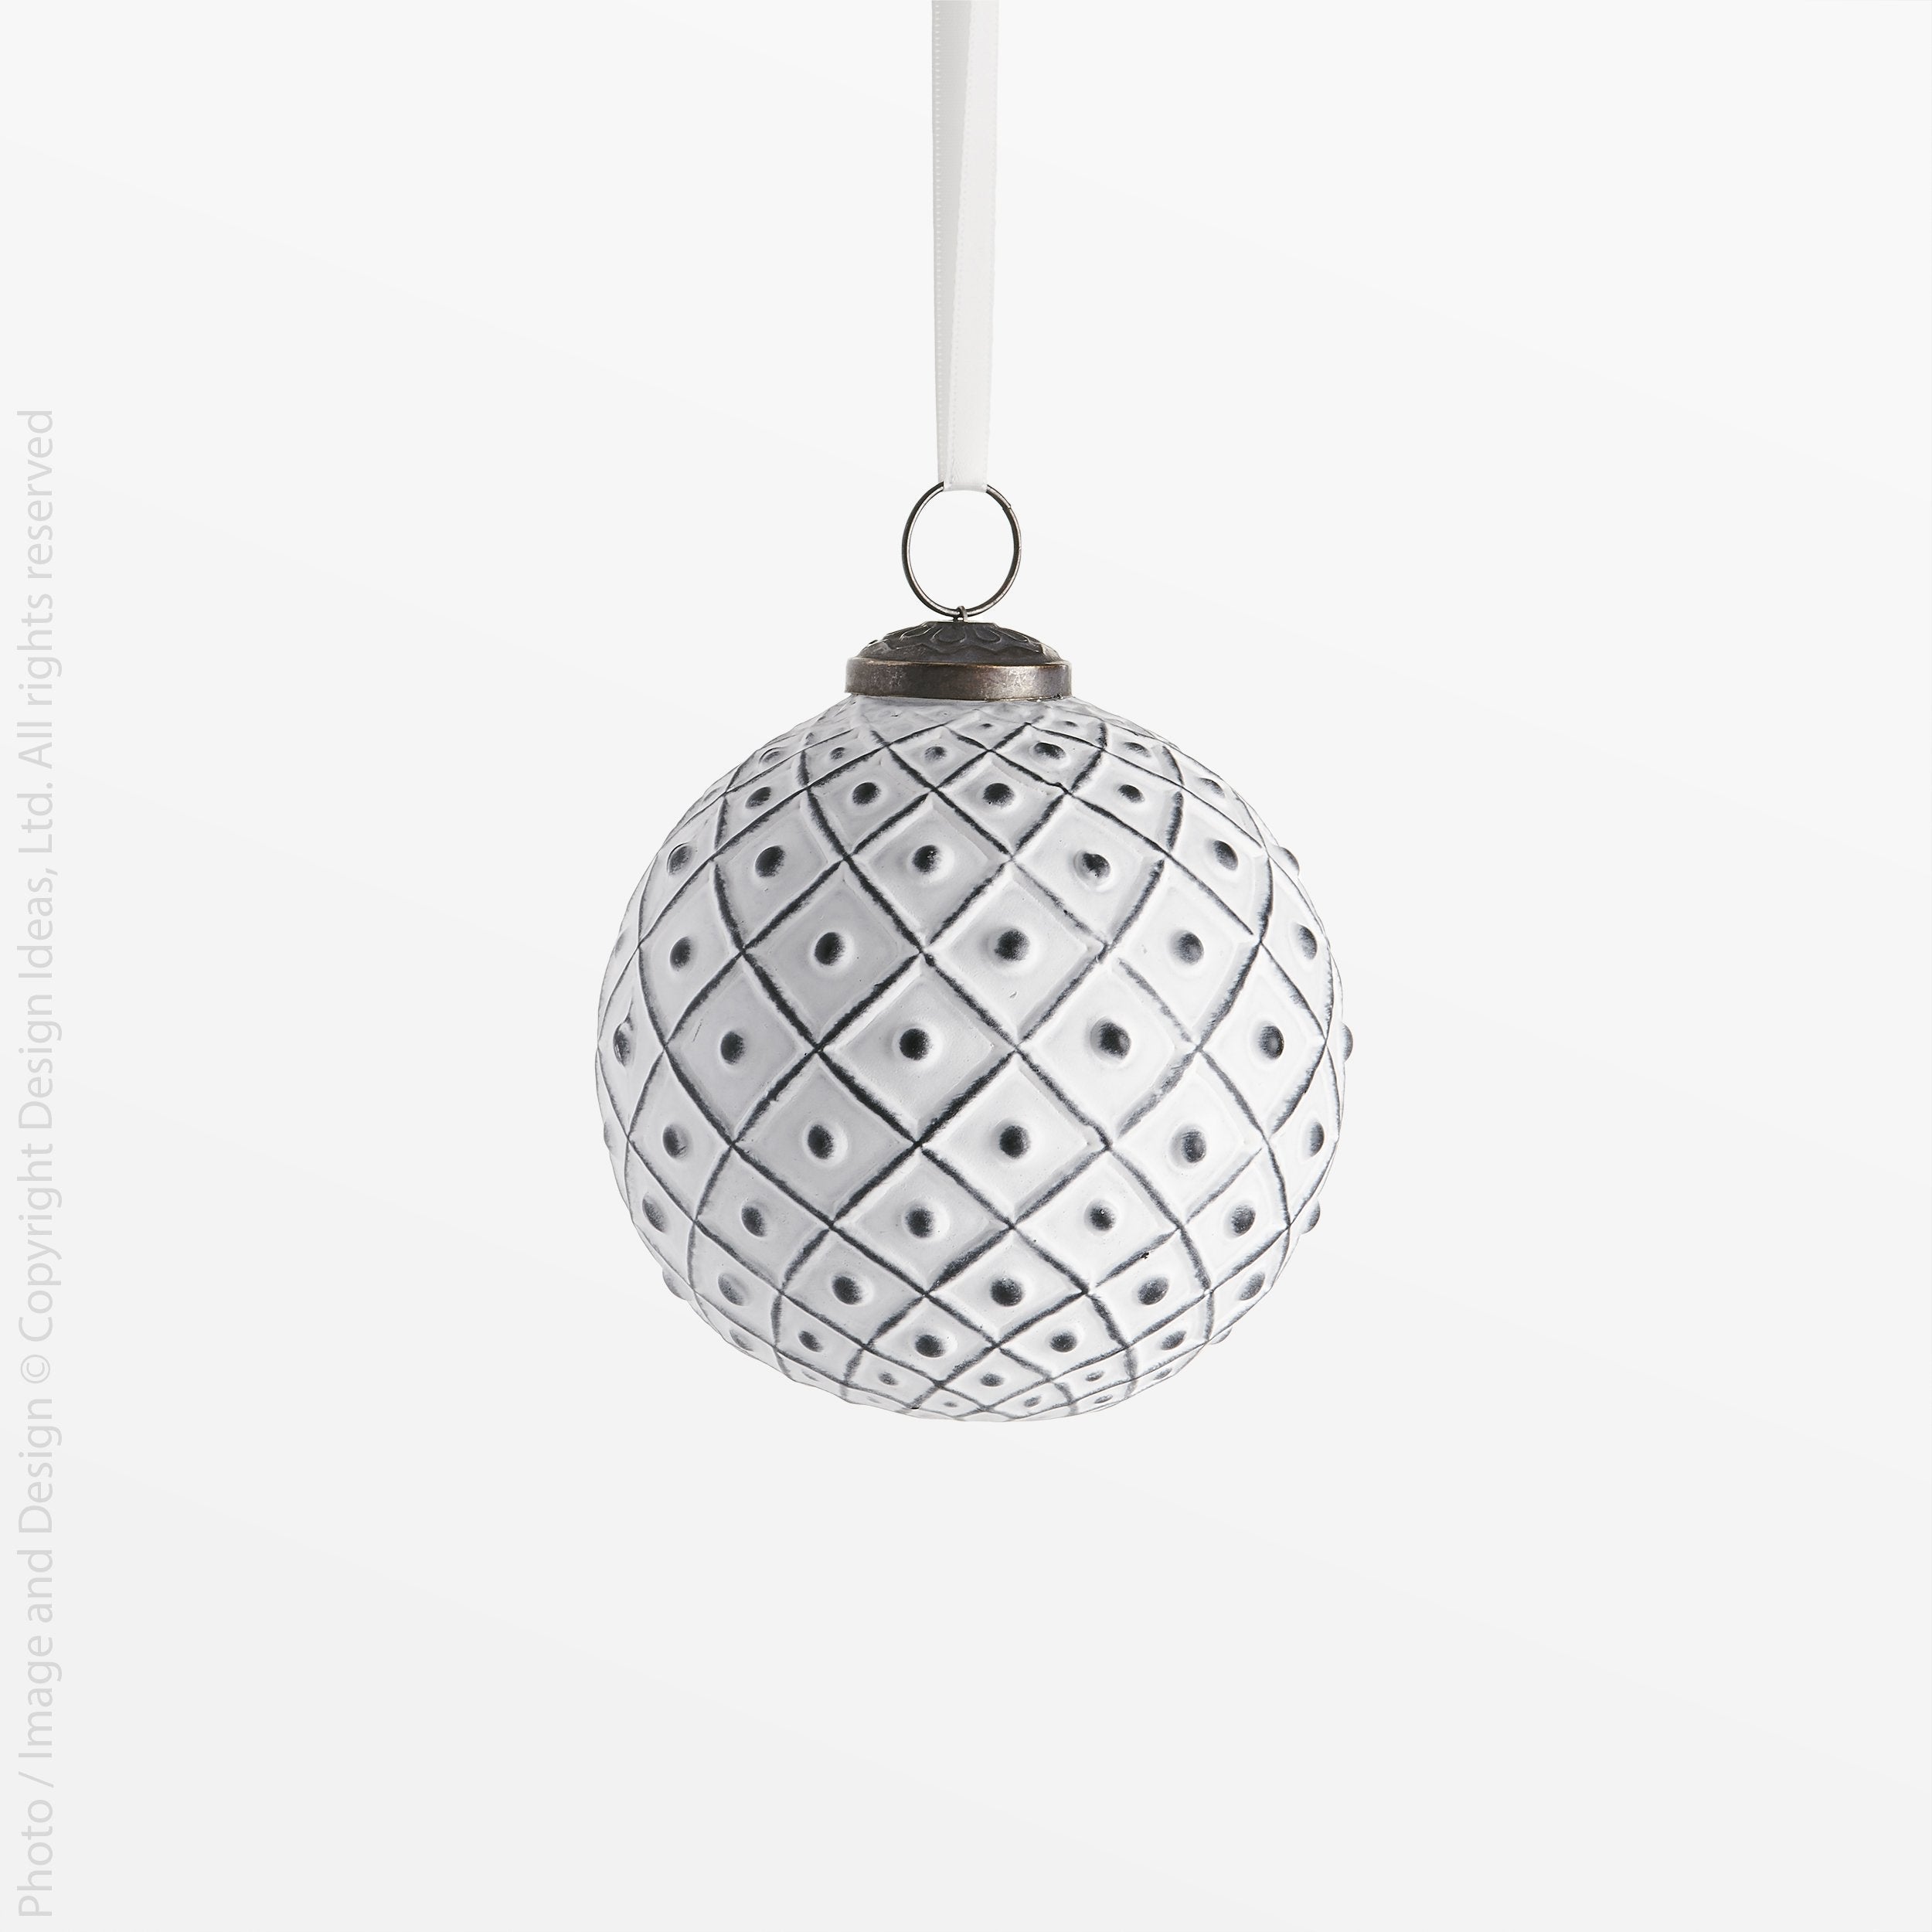 Breckenridge Sarstad Glass Ornament - Natural Color | Image 1 | From the Breckenridge Collection | Exquisitely constructed with natural glass for long lasting use | Available in white color | texxture home